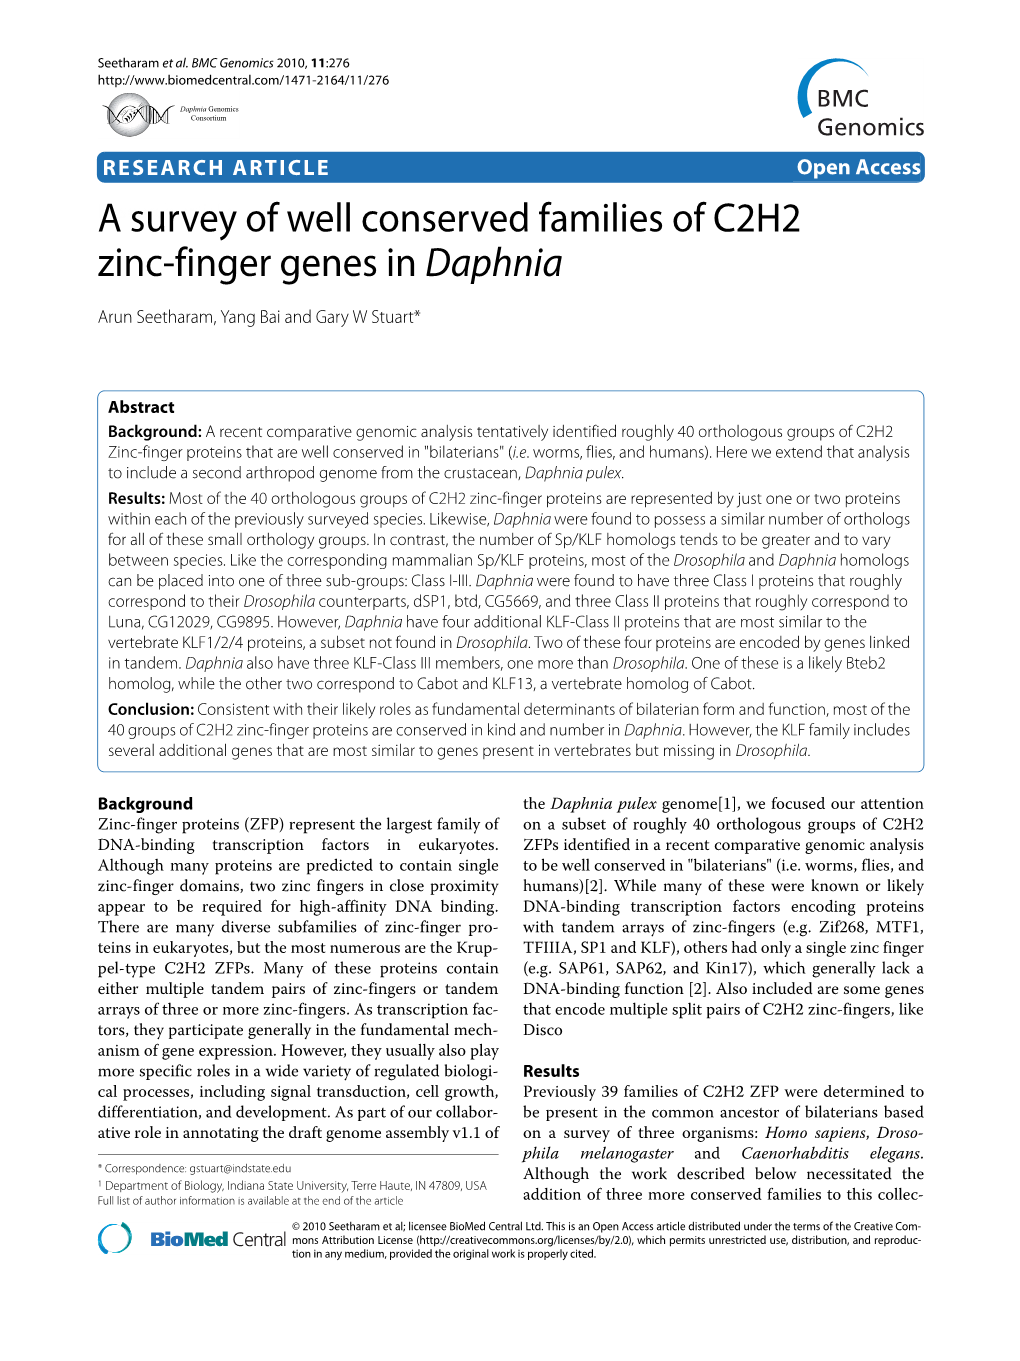 A Survey of Well Conserved Families of C2H2 Zinc-Finger Genes in Daphnia